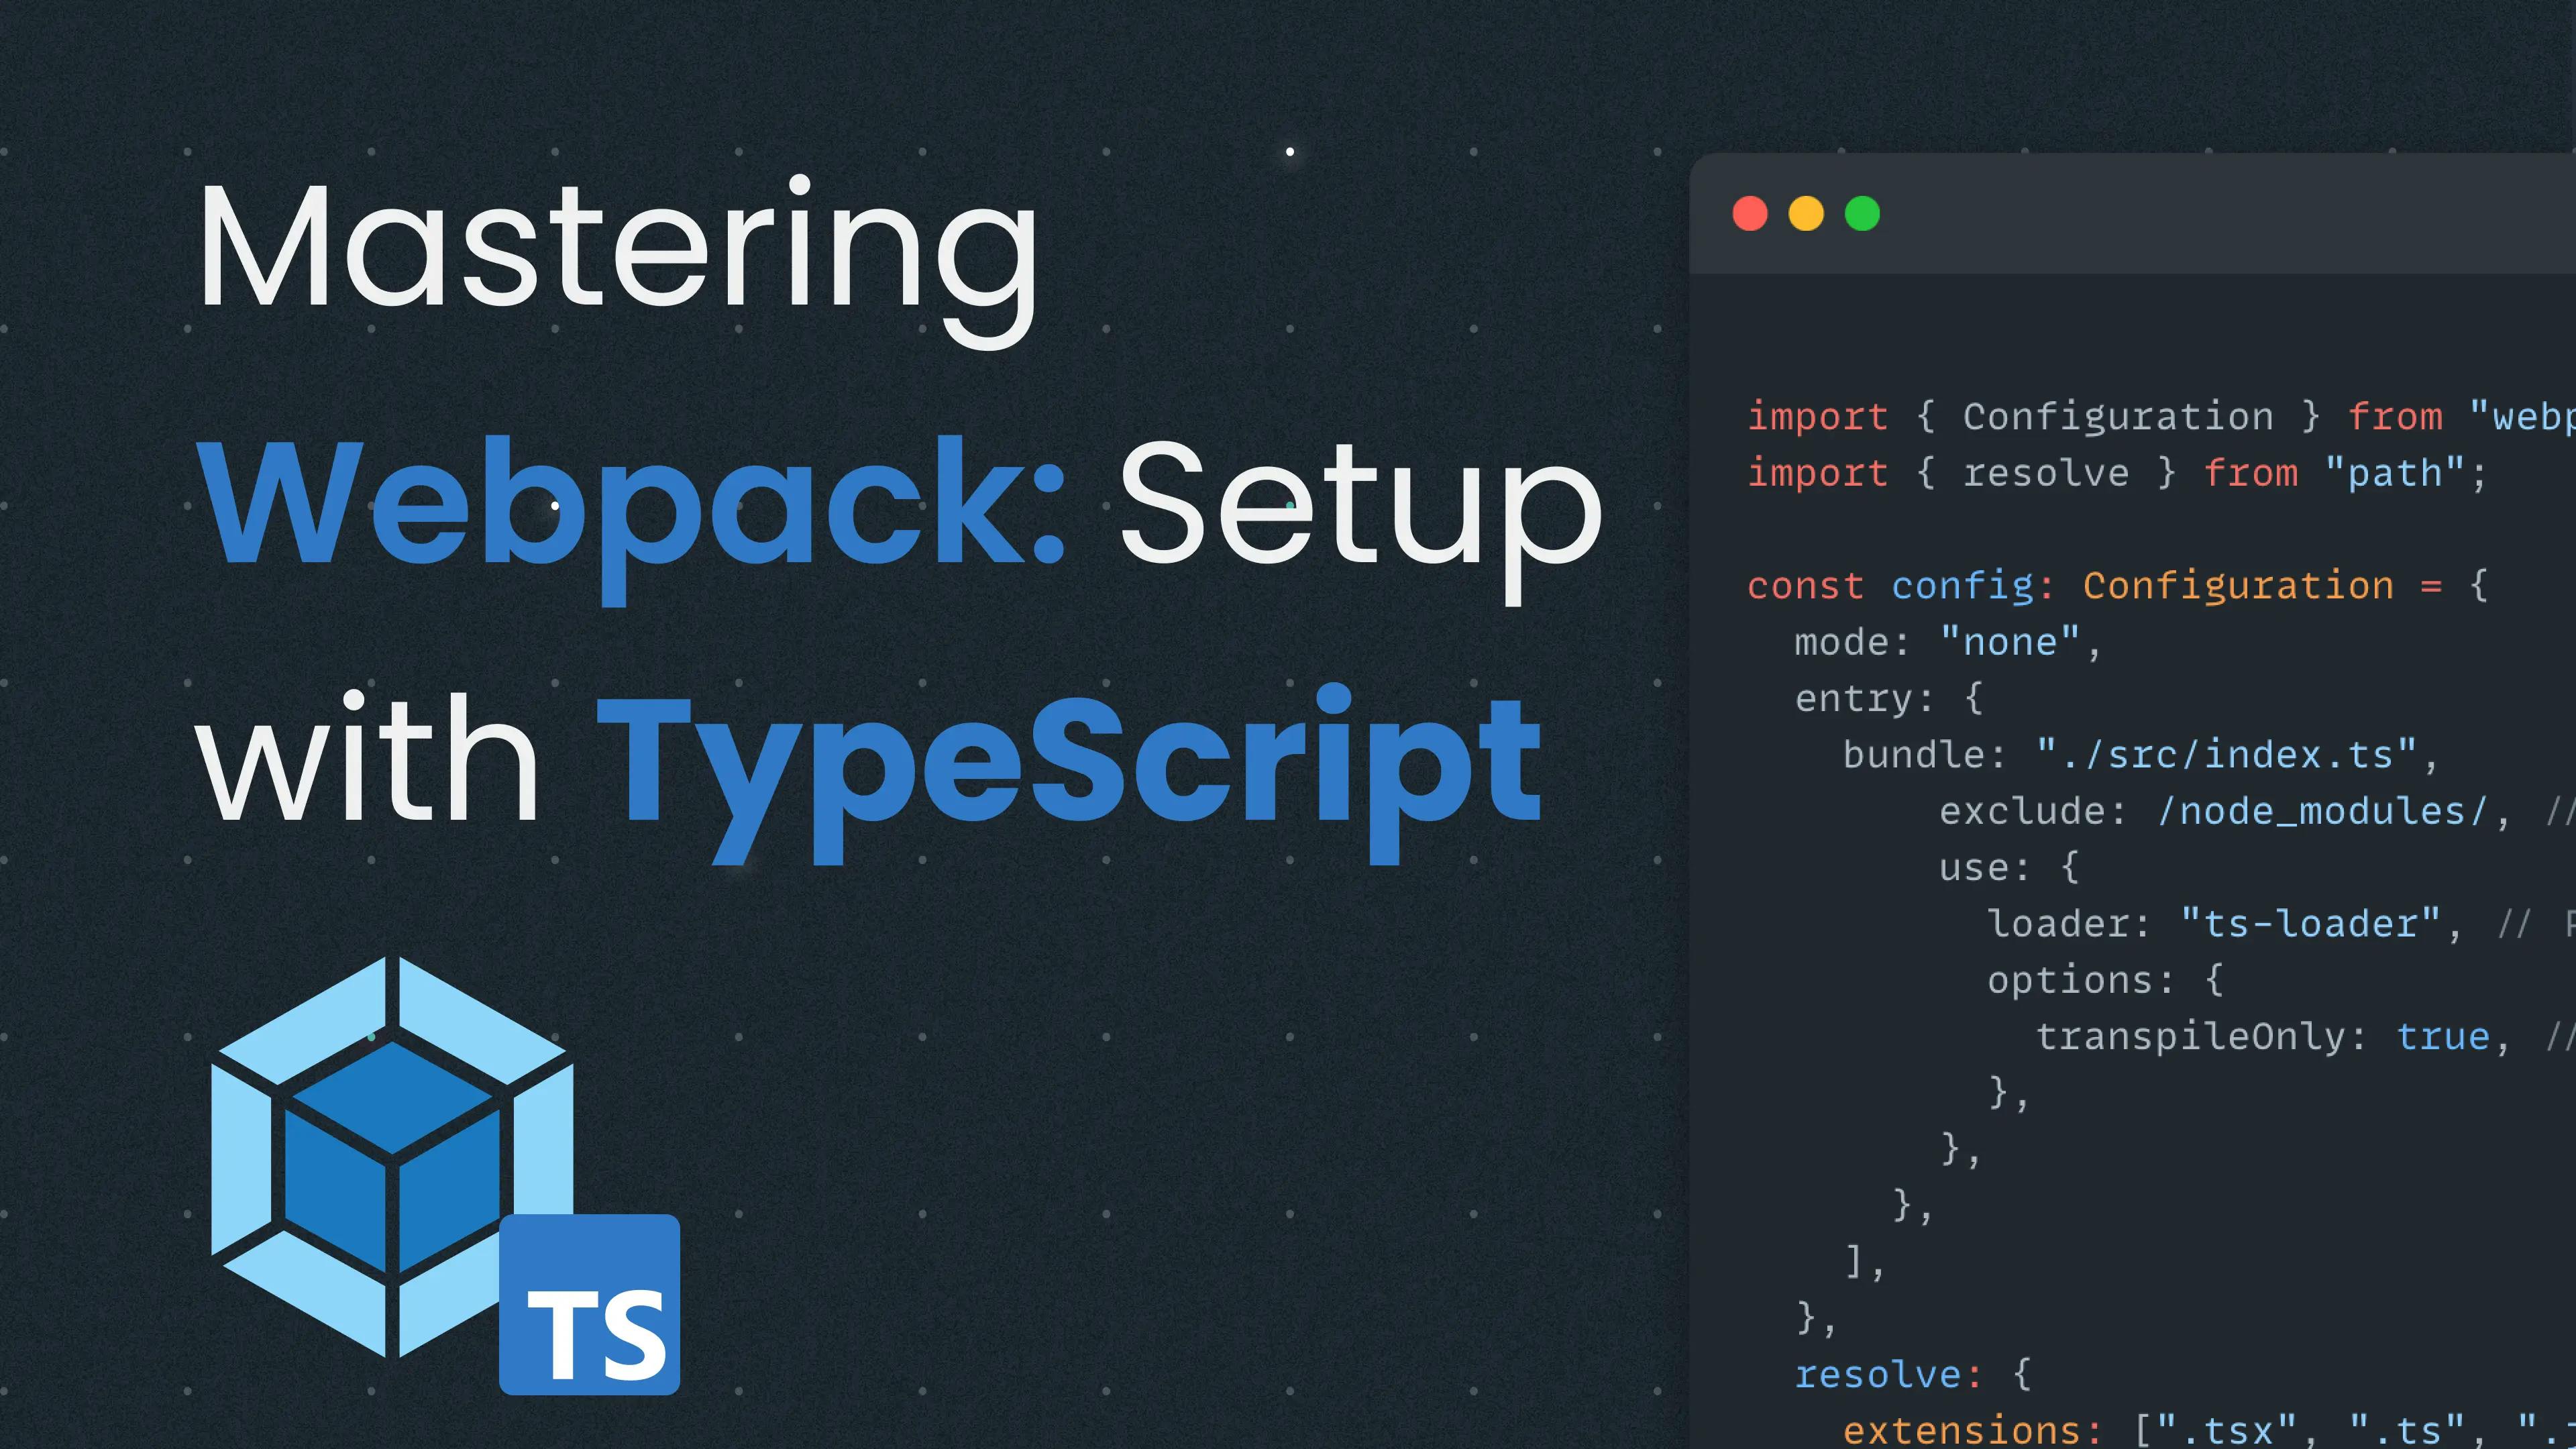 Mastering Webpack: Setting Up Webpack with TypeScript For Node.js - Part 1